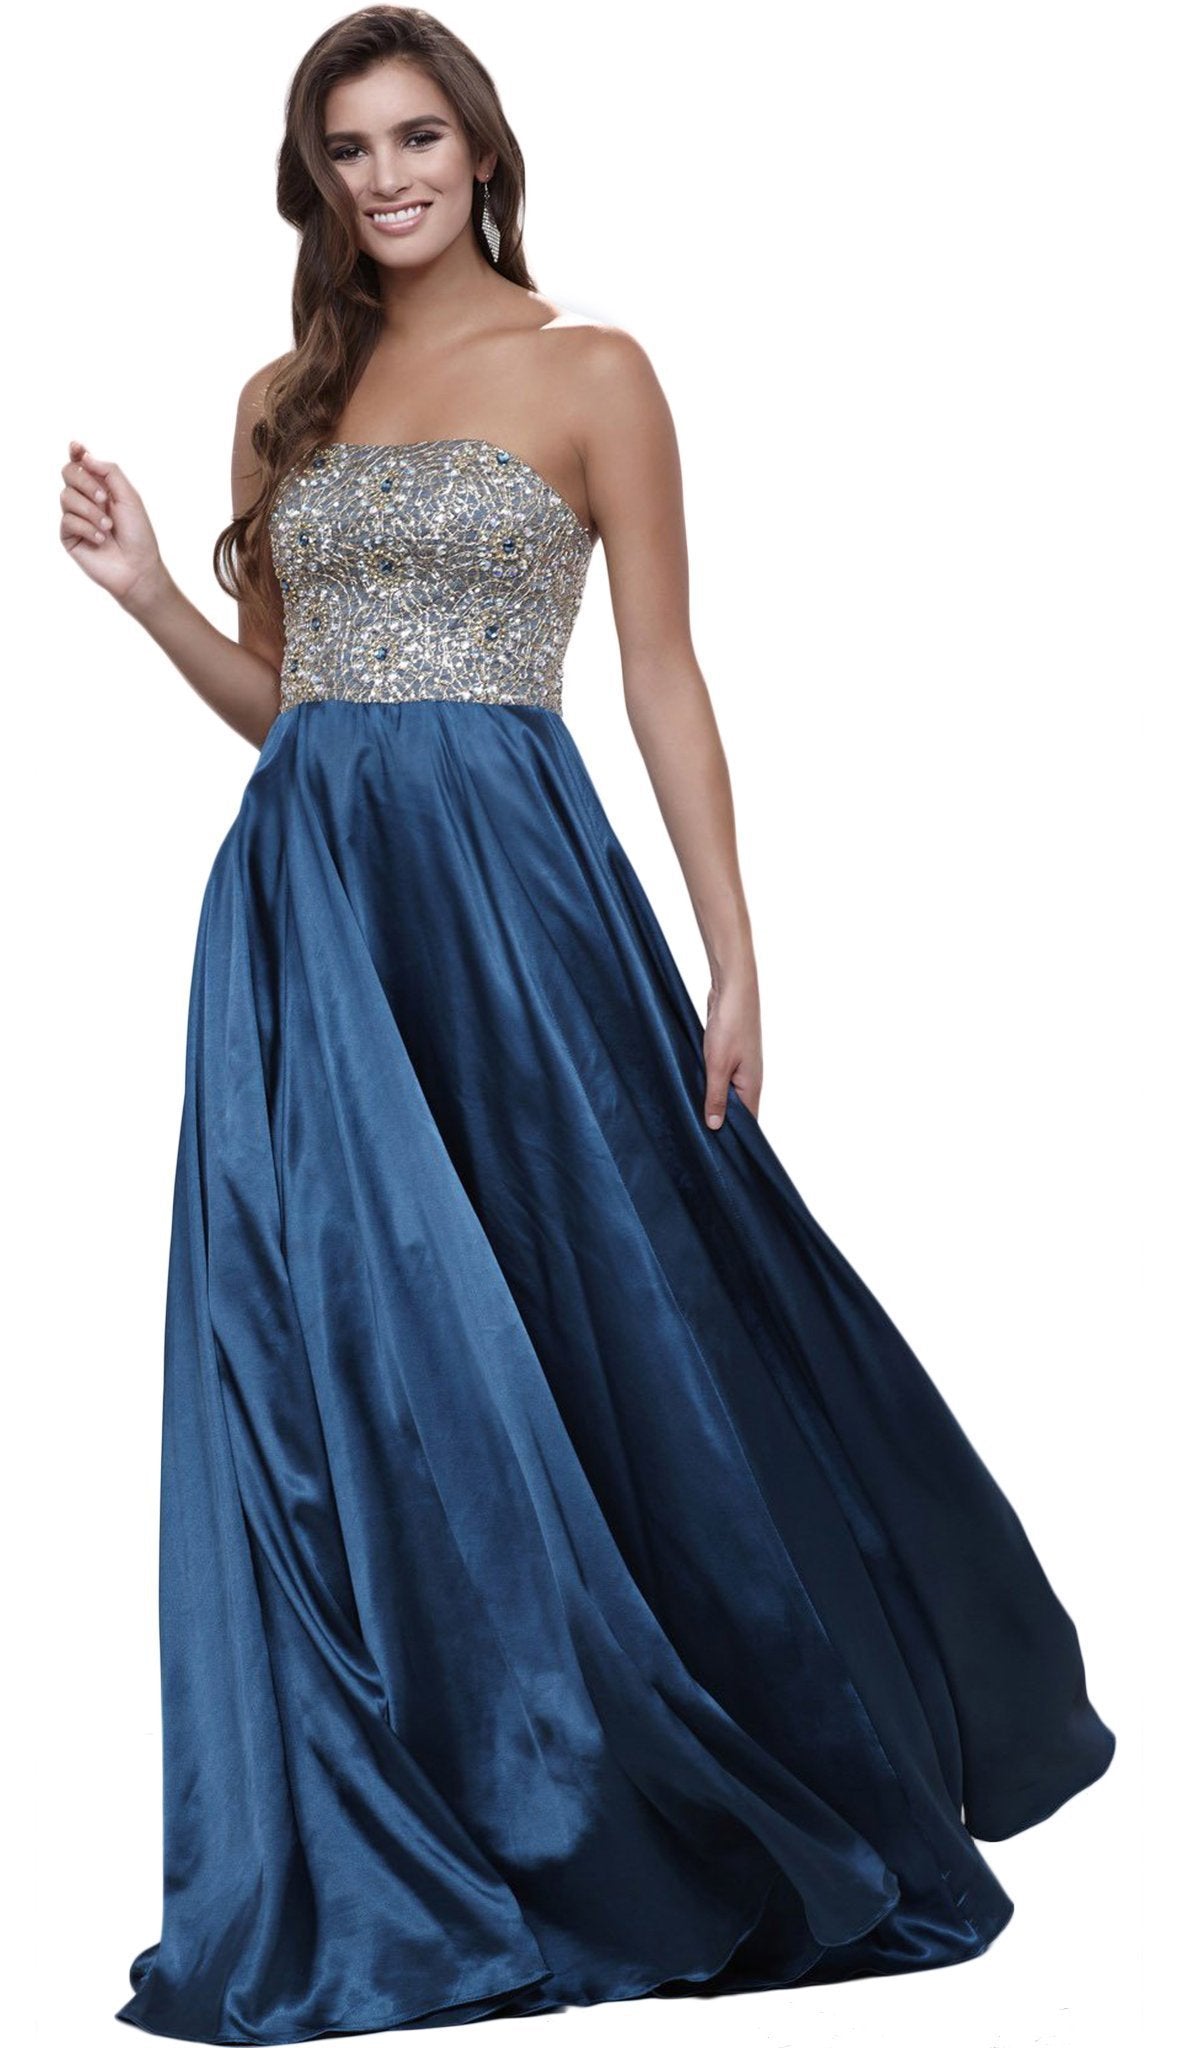 Nox Anabel - 8186 Metallic Embellished Strapless Long Evening Gown Special Occasion Dress XS / Teal